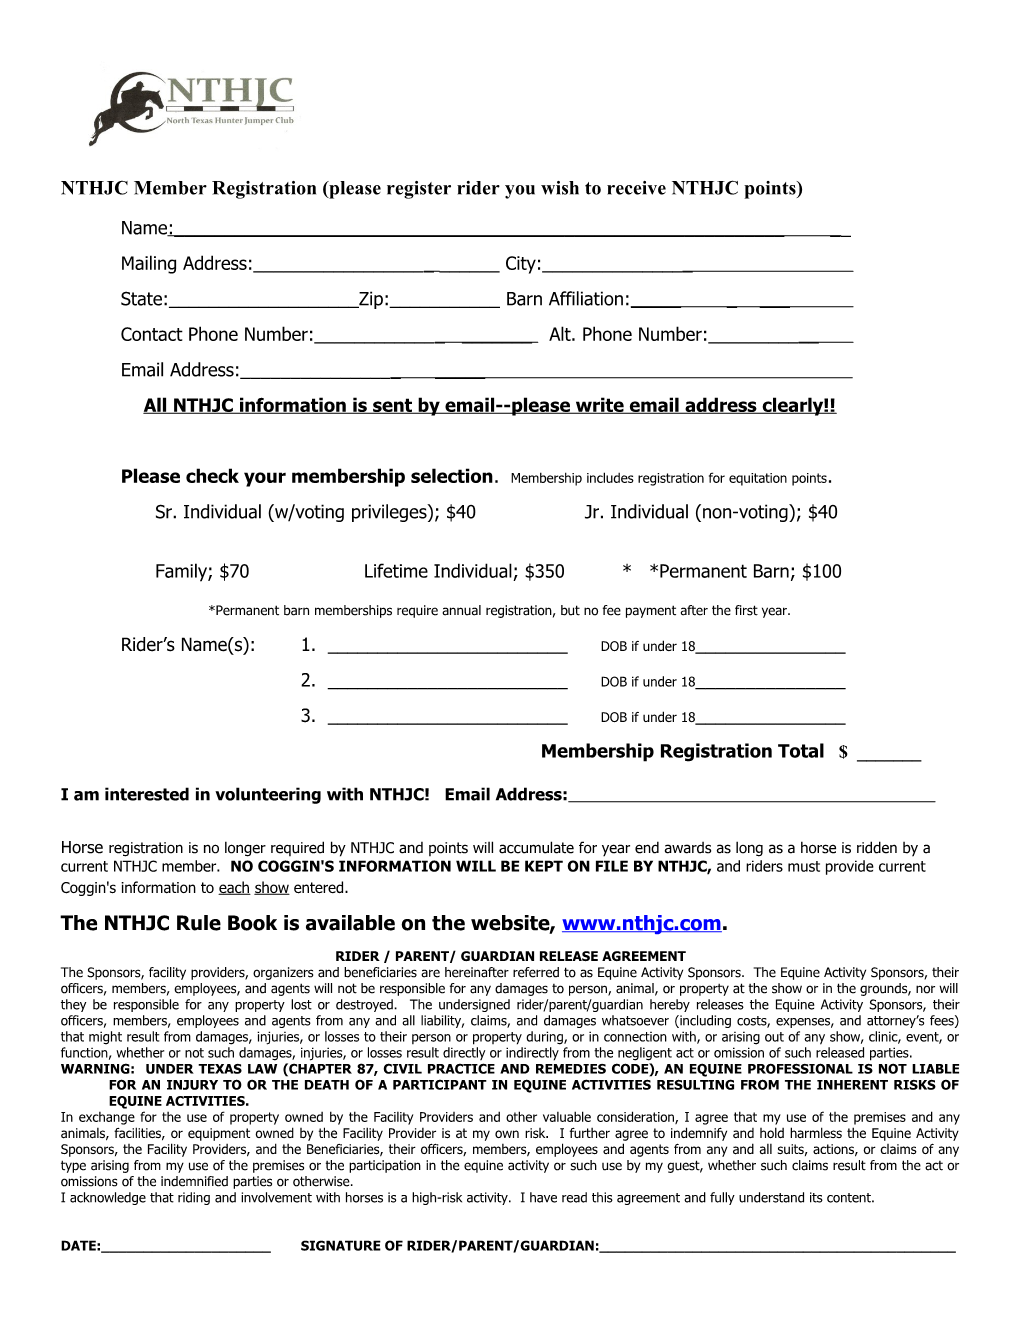 NTHJC Member Registration (Please Register Rider You Wish to Receive NTHJC Points)